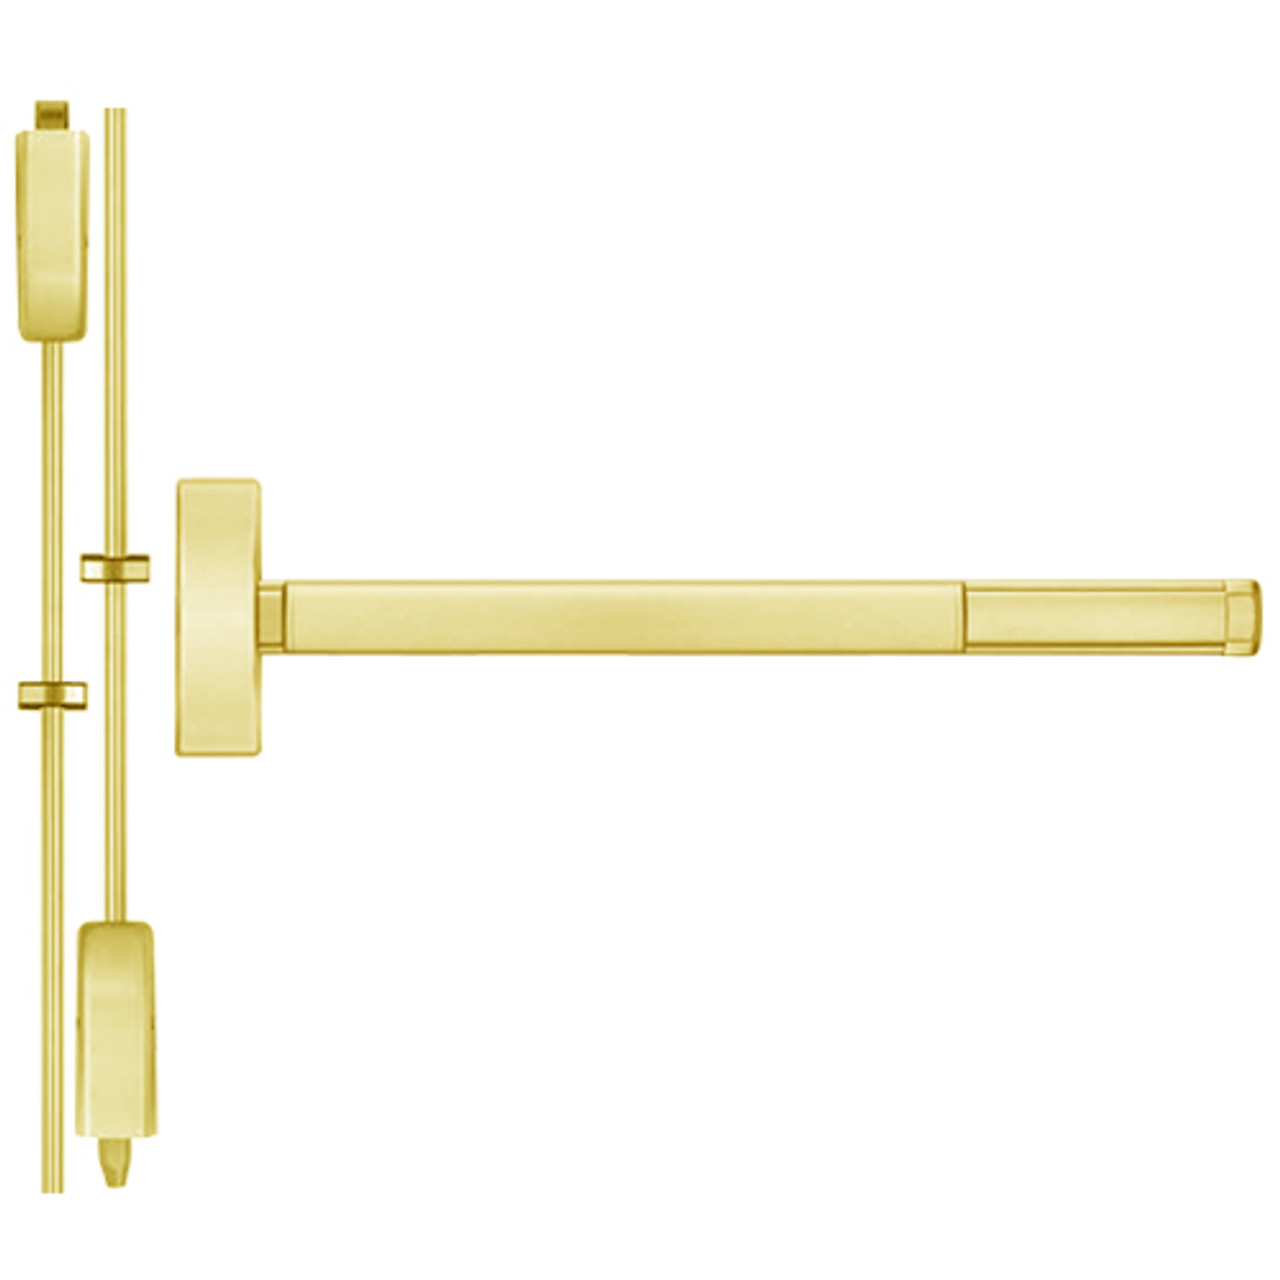 DEFL2202LBR-605-48 PHI 2200 Series Fire Rated Apex Surface Vertical Rod Device with Delayed Egress Prepped for Dummy Trim in Bright Brass Finish